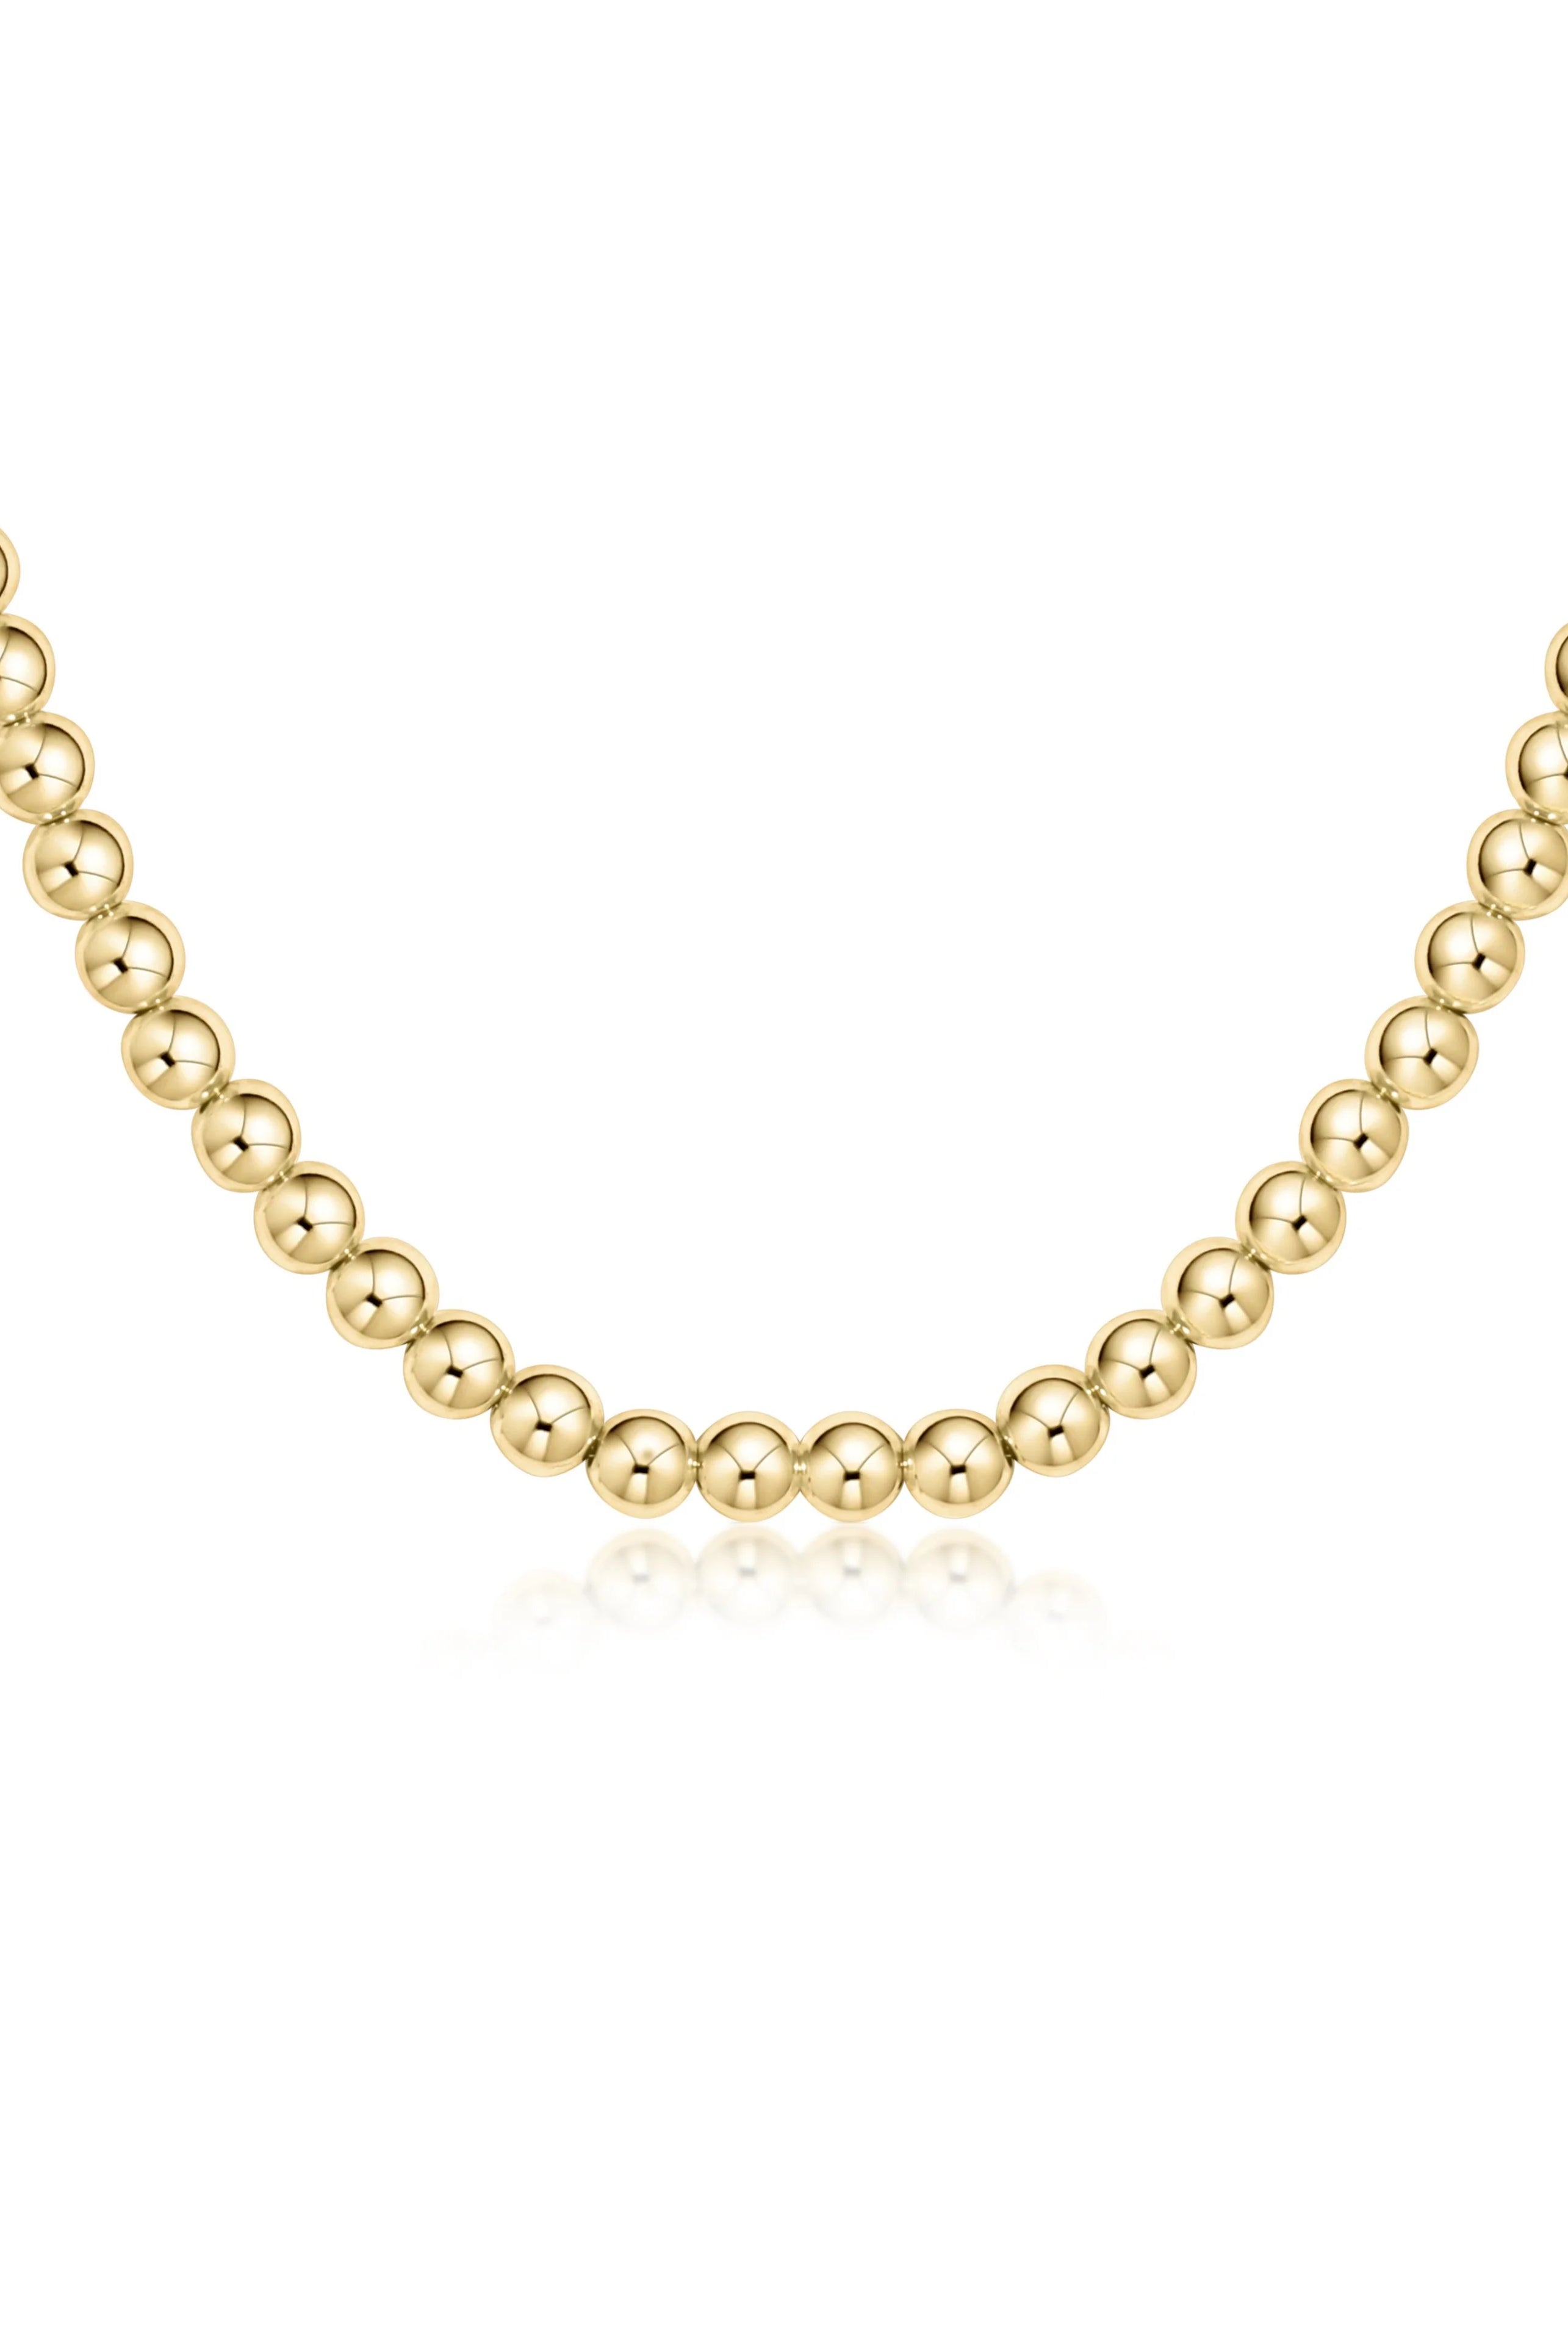 Classic Gold 5mm Necklace-Necklaces-eNewton-The Lovely Closet, Women's Fashion Boutique in Alexandria, KY